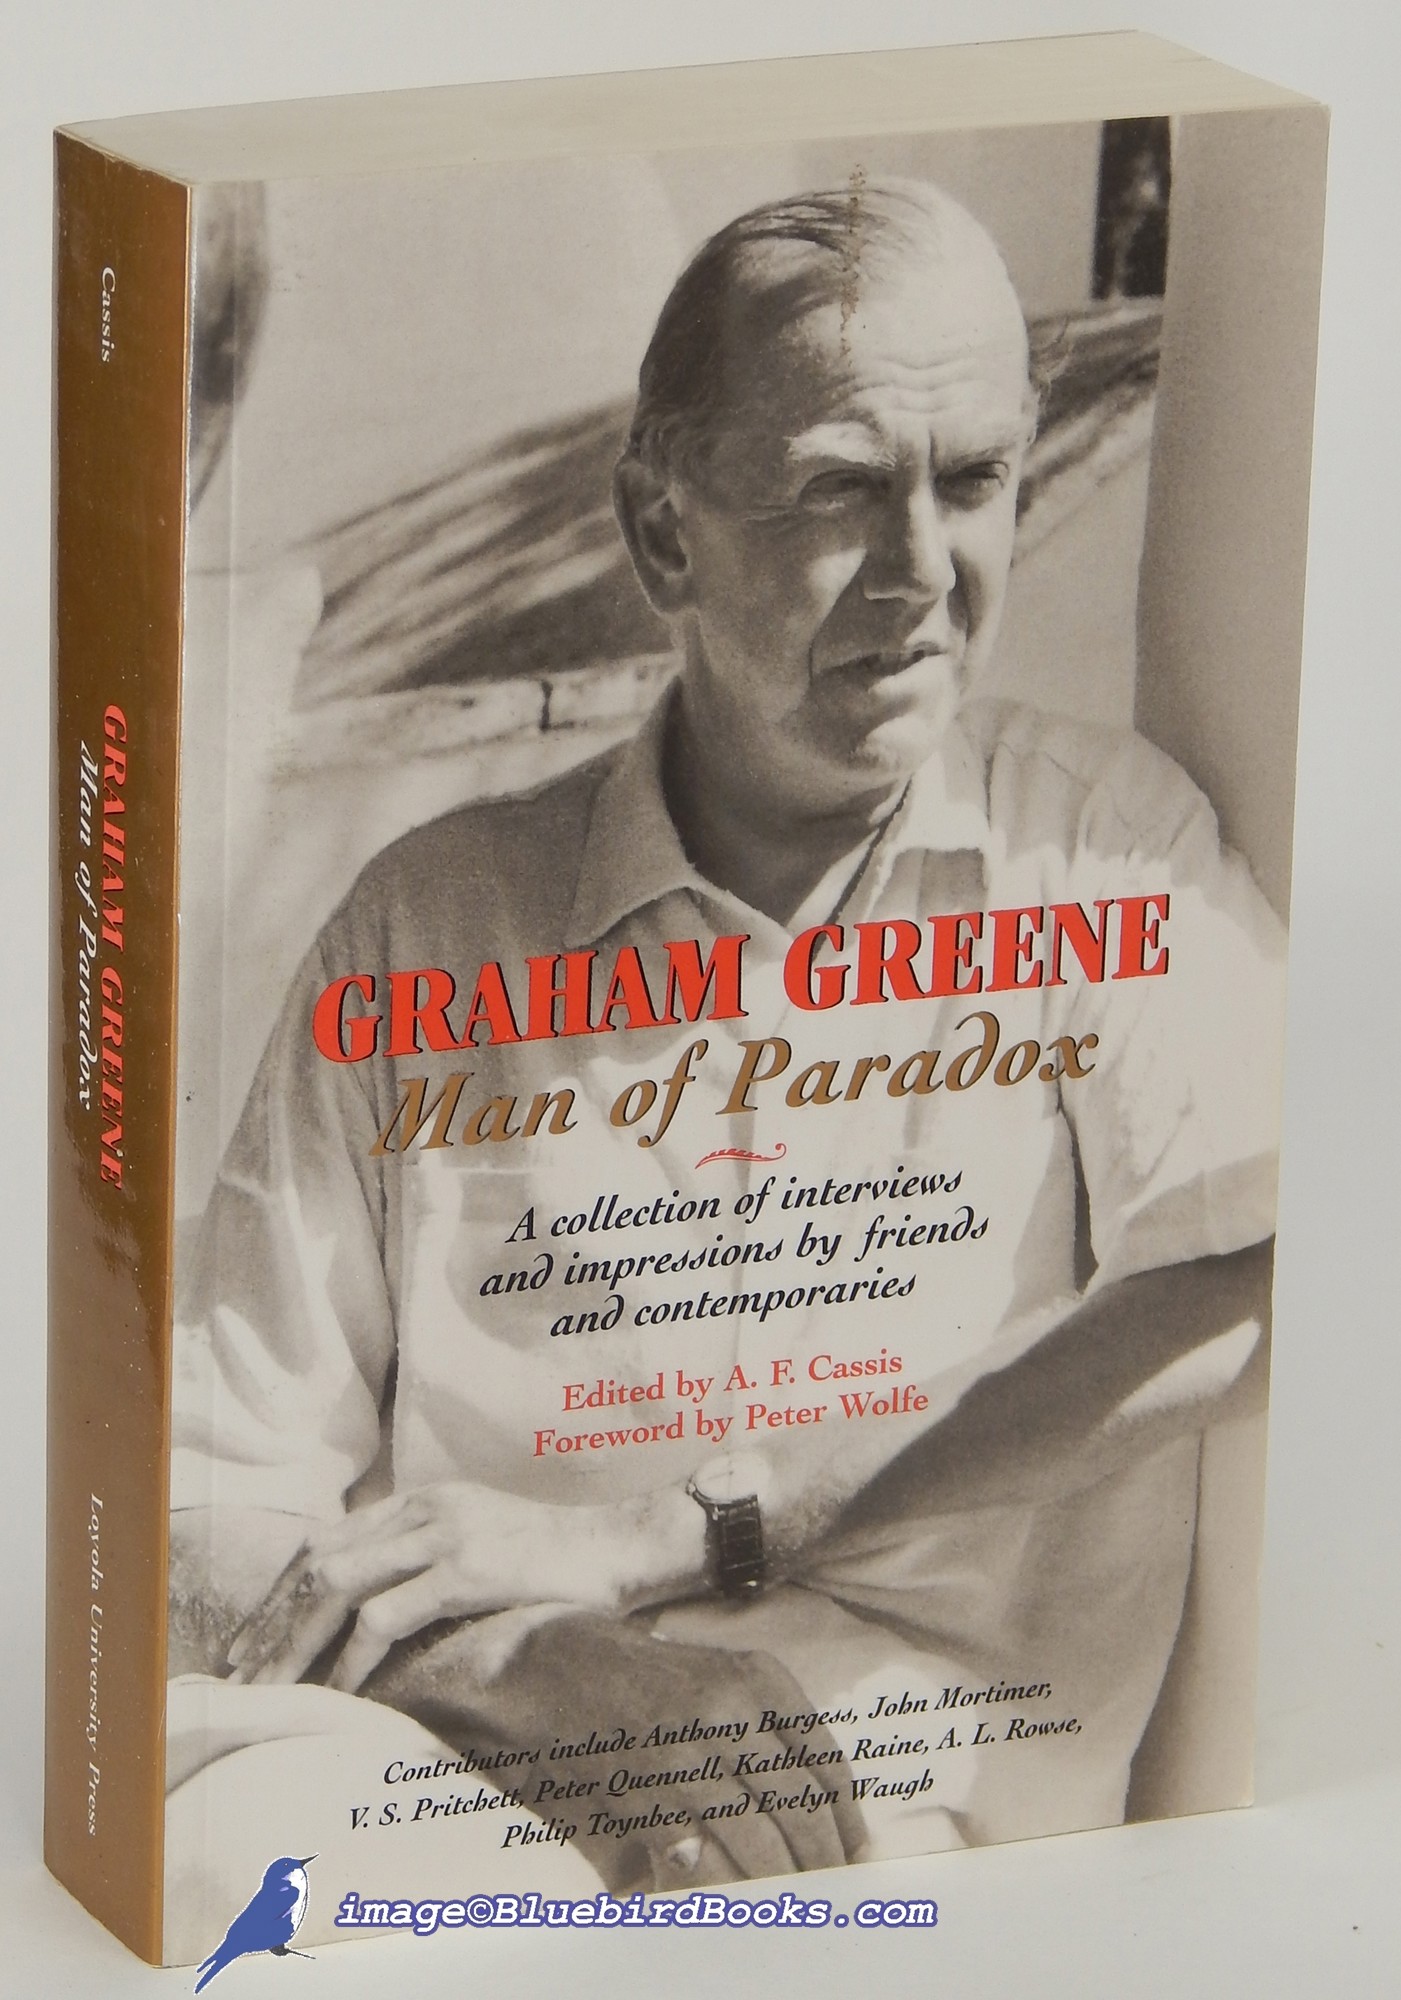 CASSIS, A. F. (EDITOR) - Graham Greene: Man of Paradox, a Collection of Interviews and Impressions by Friends and Contemporaries